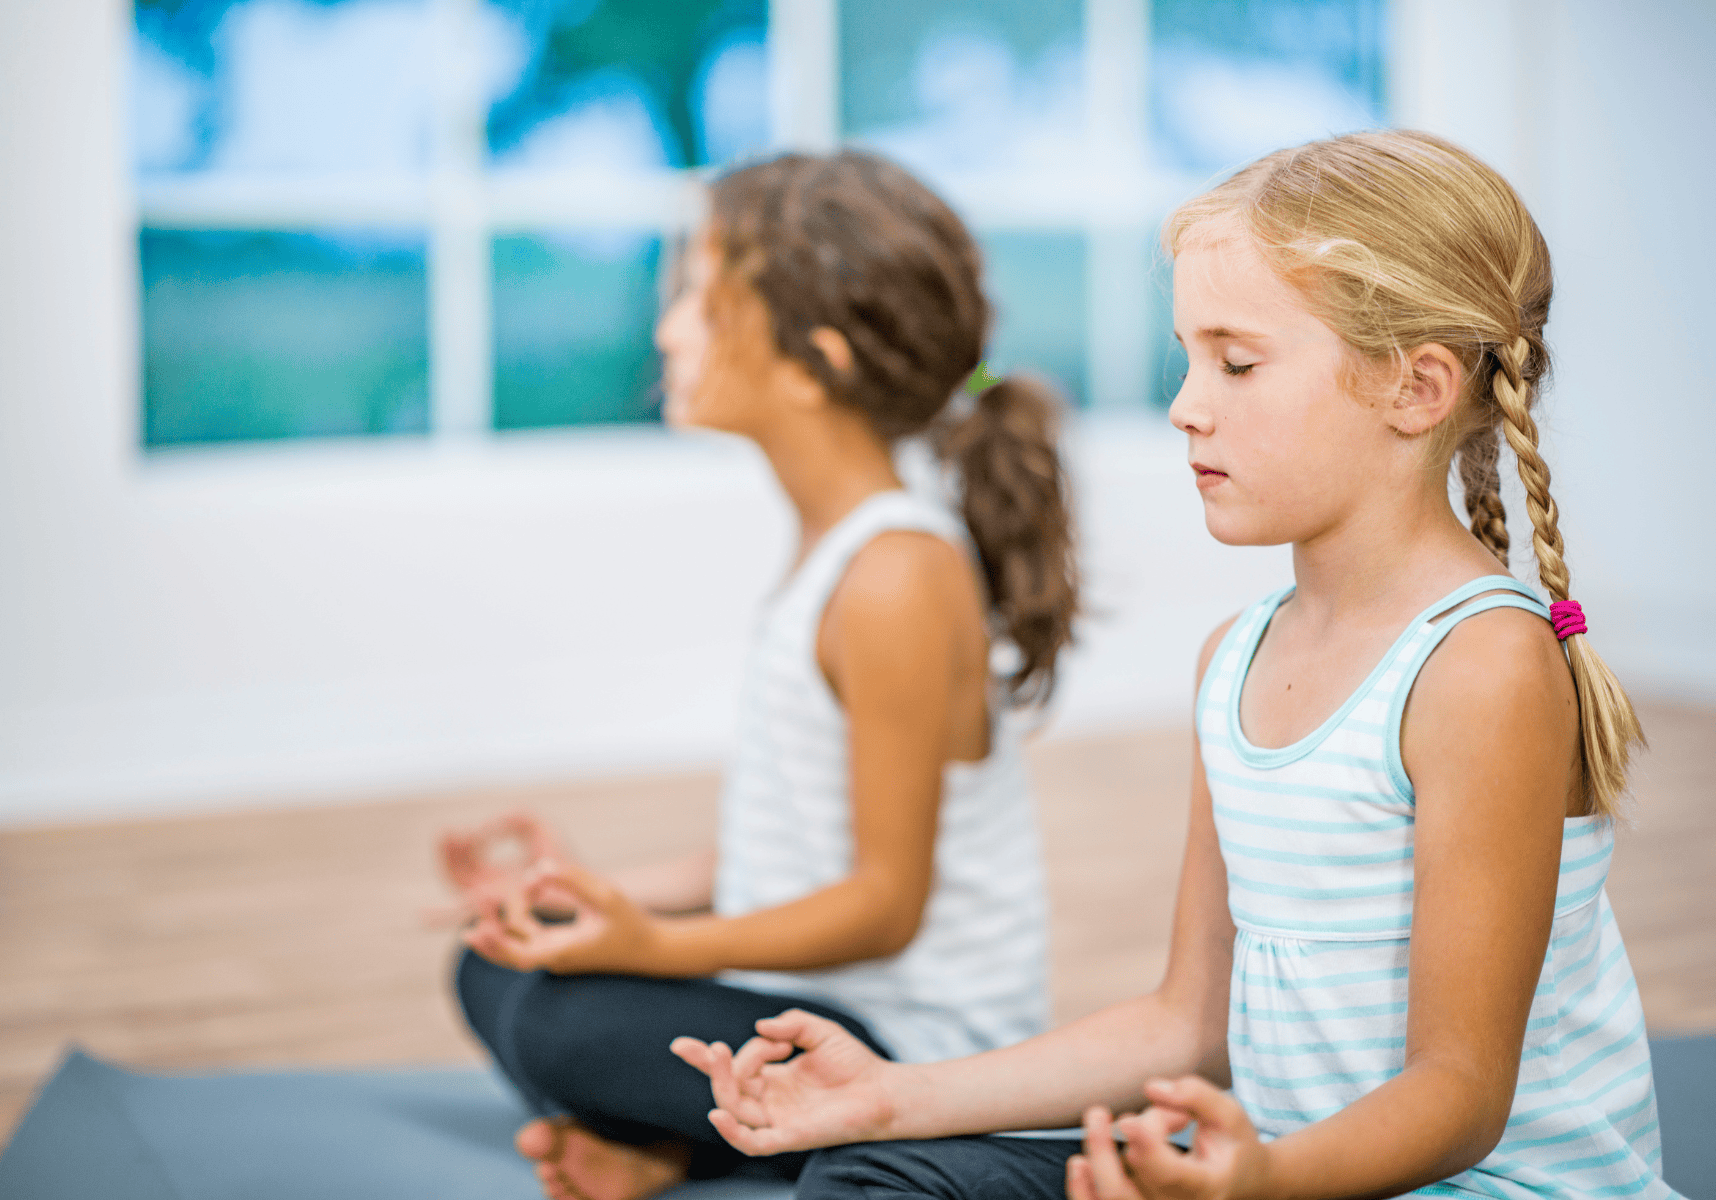 What Is the Easiest Yoga for Kids?